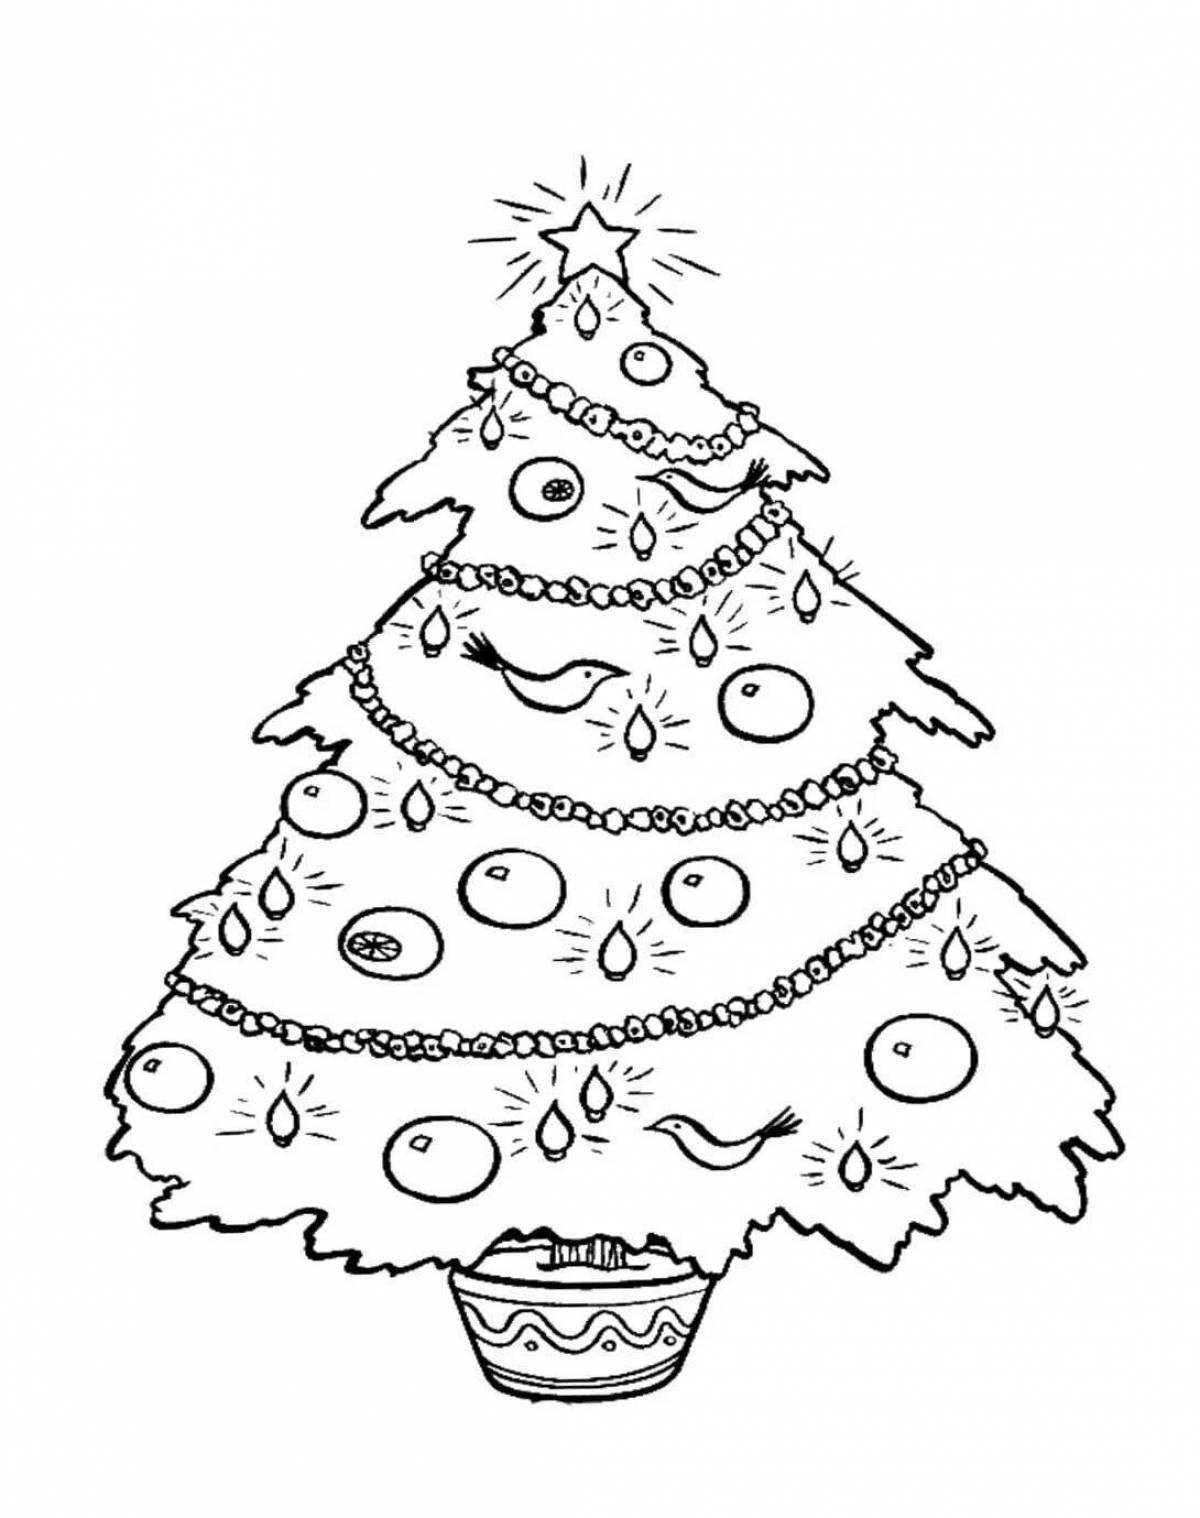 Colorful christmas tree coloring page